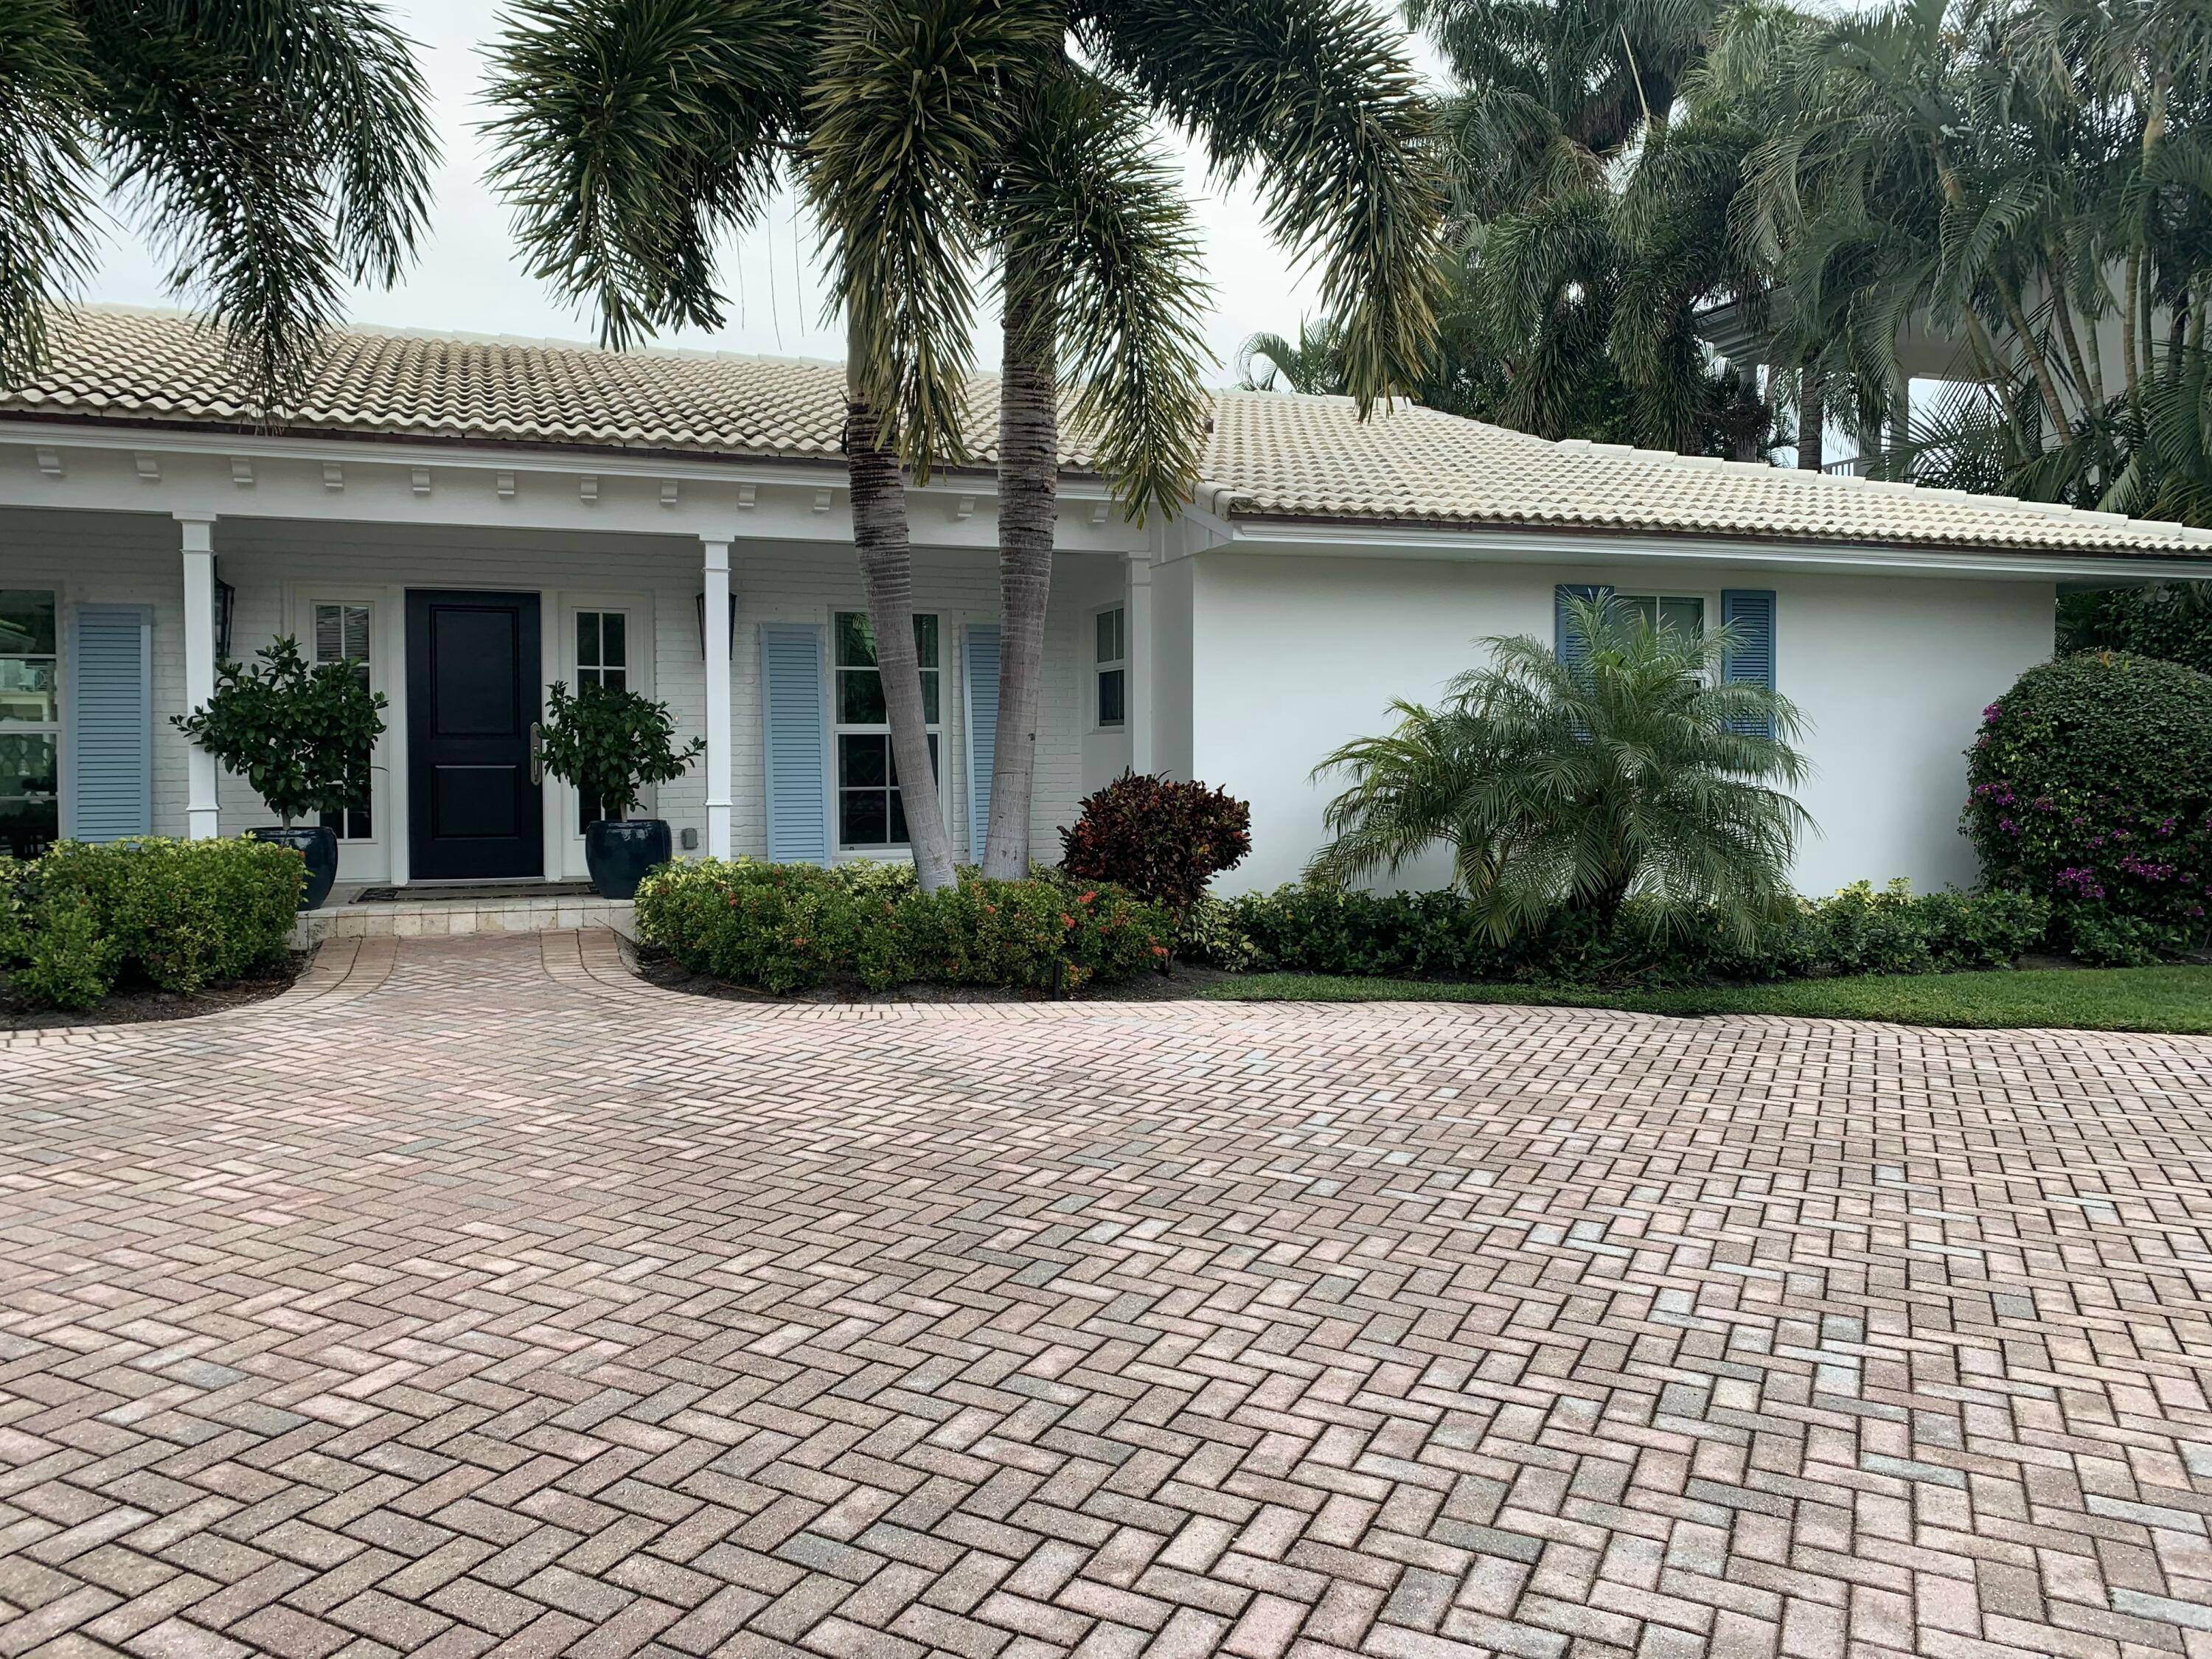 Beautiful 3 bedroom, 4 bath Intracoastal home minutes to the beach and downtown Delray !